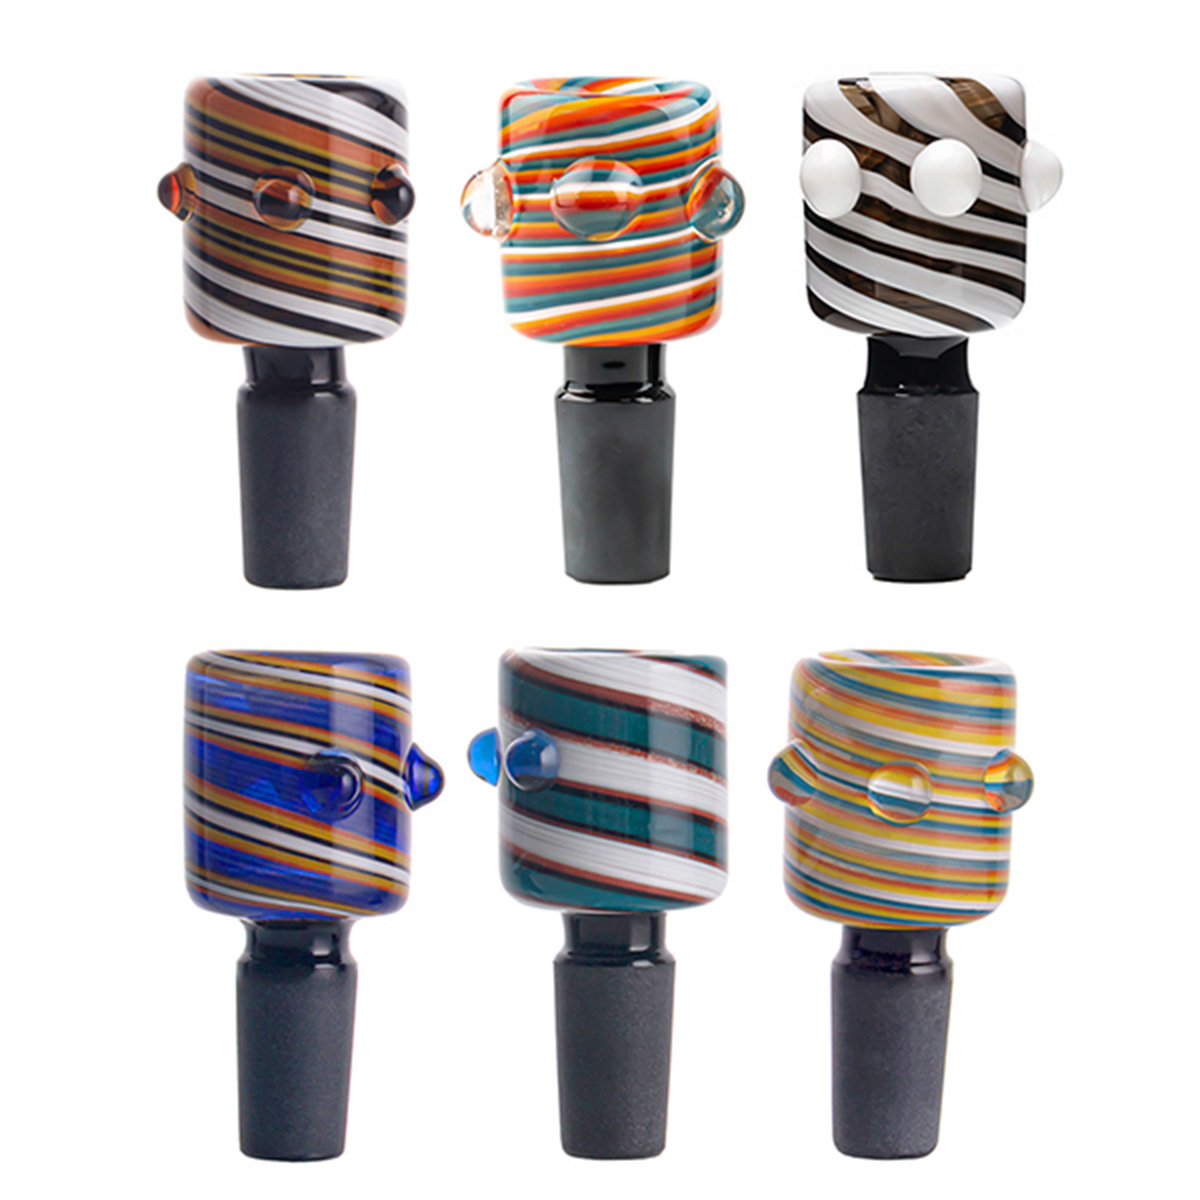 Colorful Stripe Glass Bowl Herb Holder Smoking Accessories 14mm 18mm Male For Glass Bongs Water Pipes Dab Rigs PT154